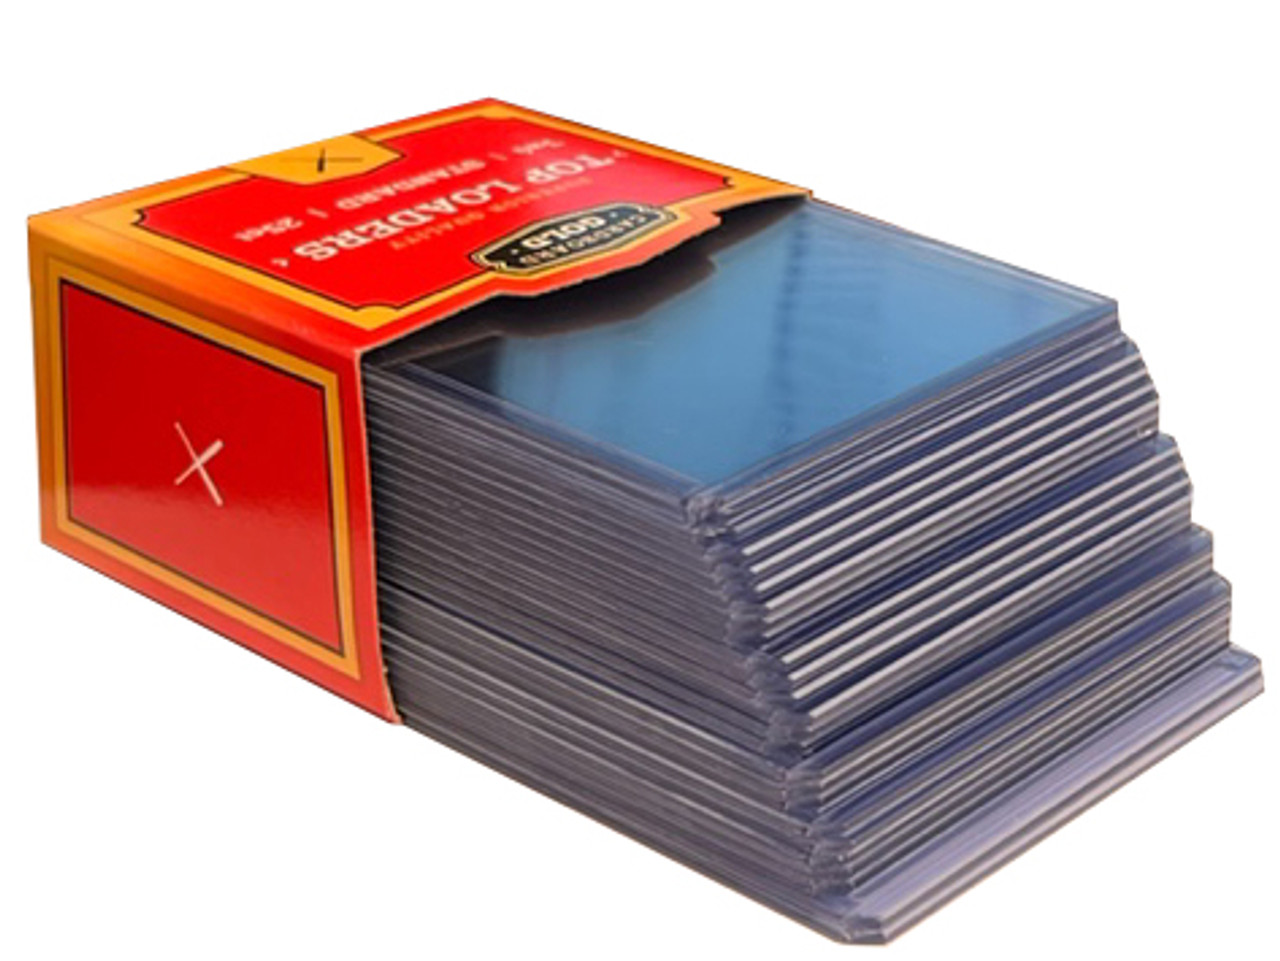 Top-Loader 3x4 Standard Size Trading, Sports, & Gaming Cards